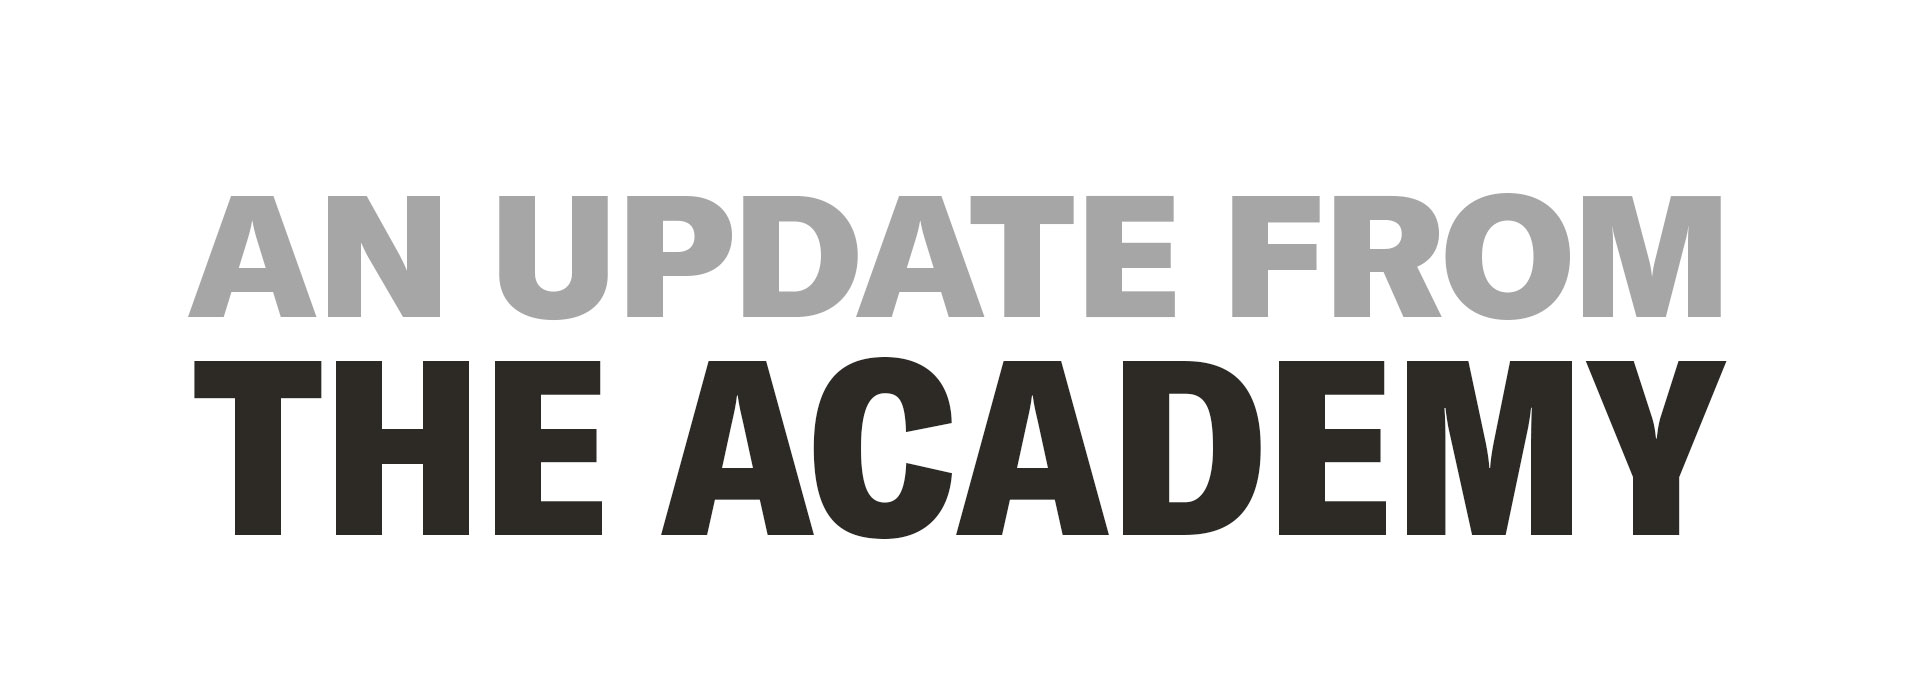 An Update from the Academy